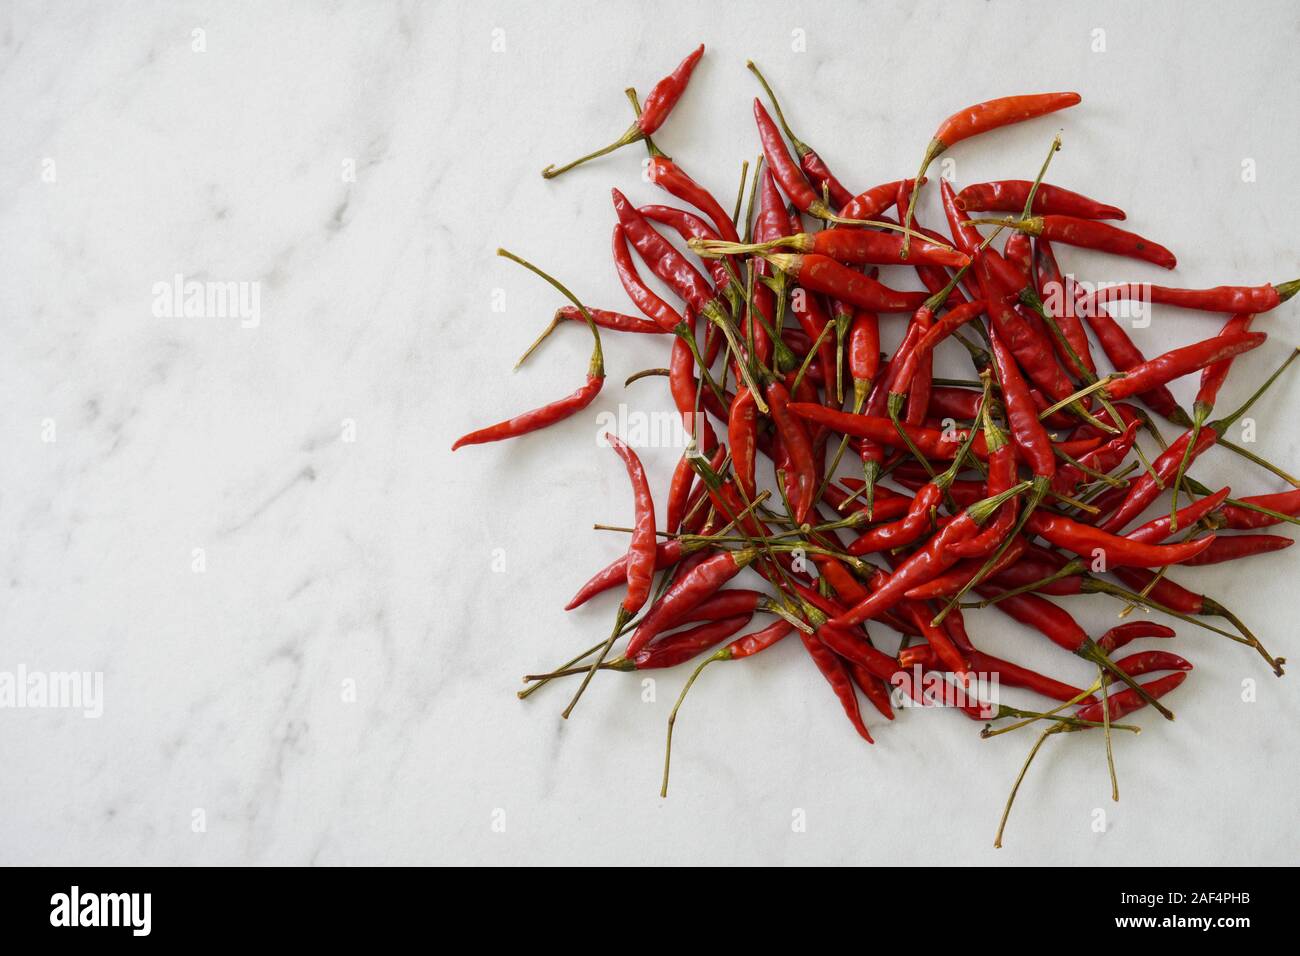 View from above of a pile of bright red Thai bird chiles on a white marble cutting board with copy space; food preparation Stock Photo